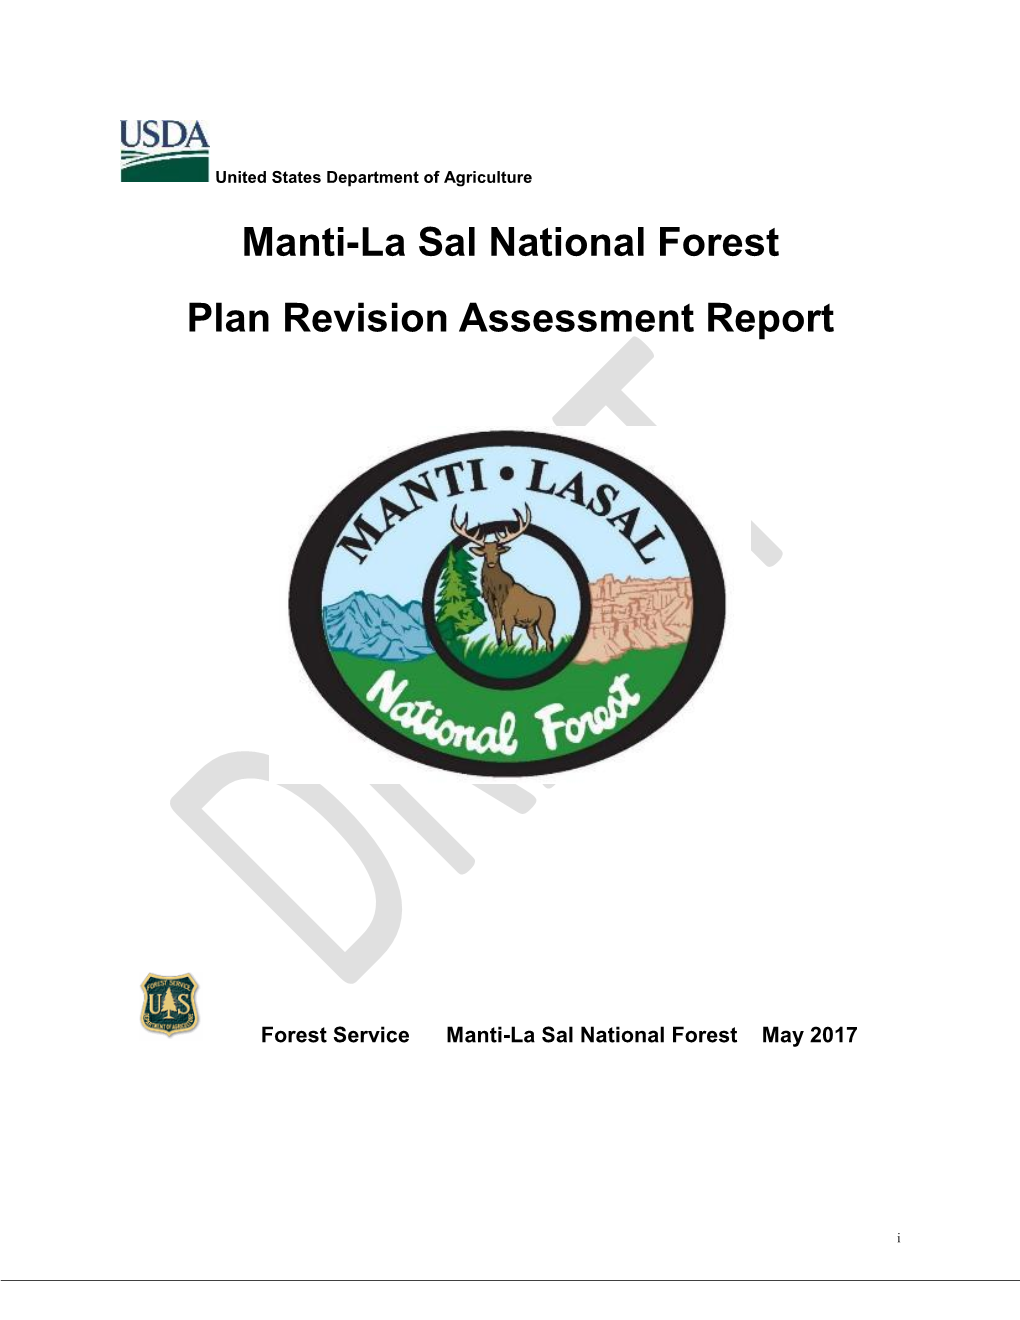 Manti-La Sal National Forest Plan Revision Assessment Report